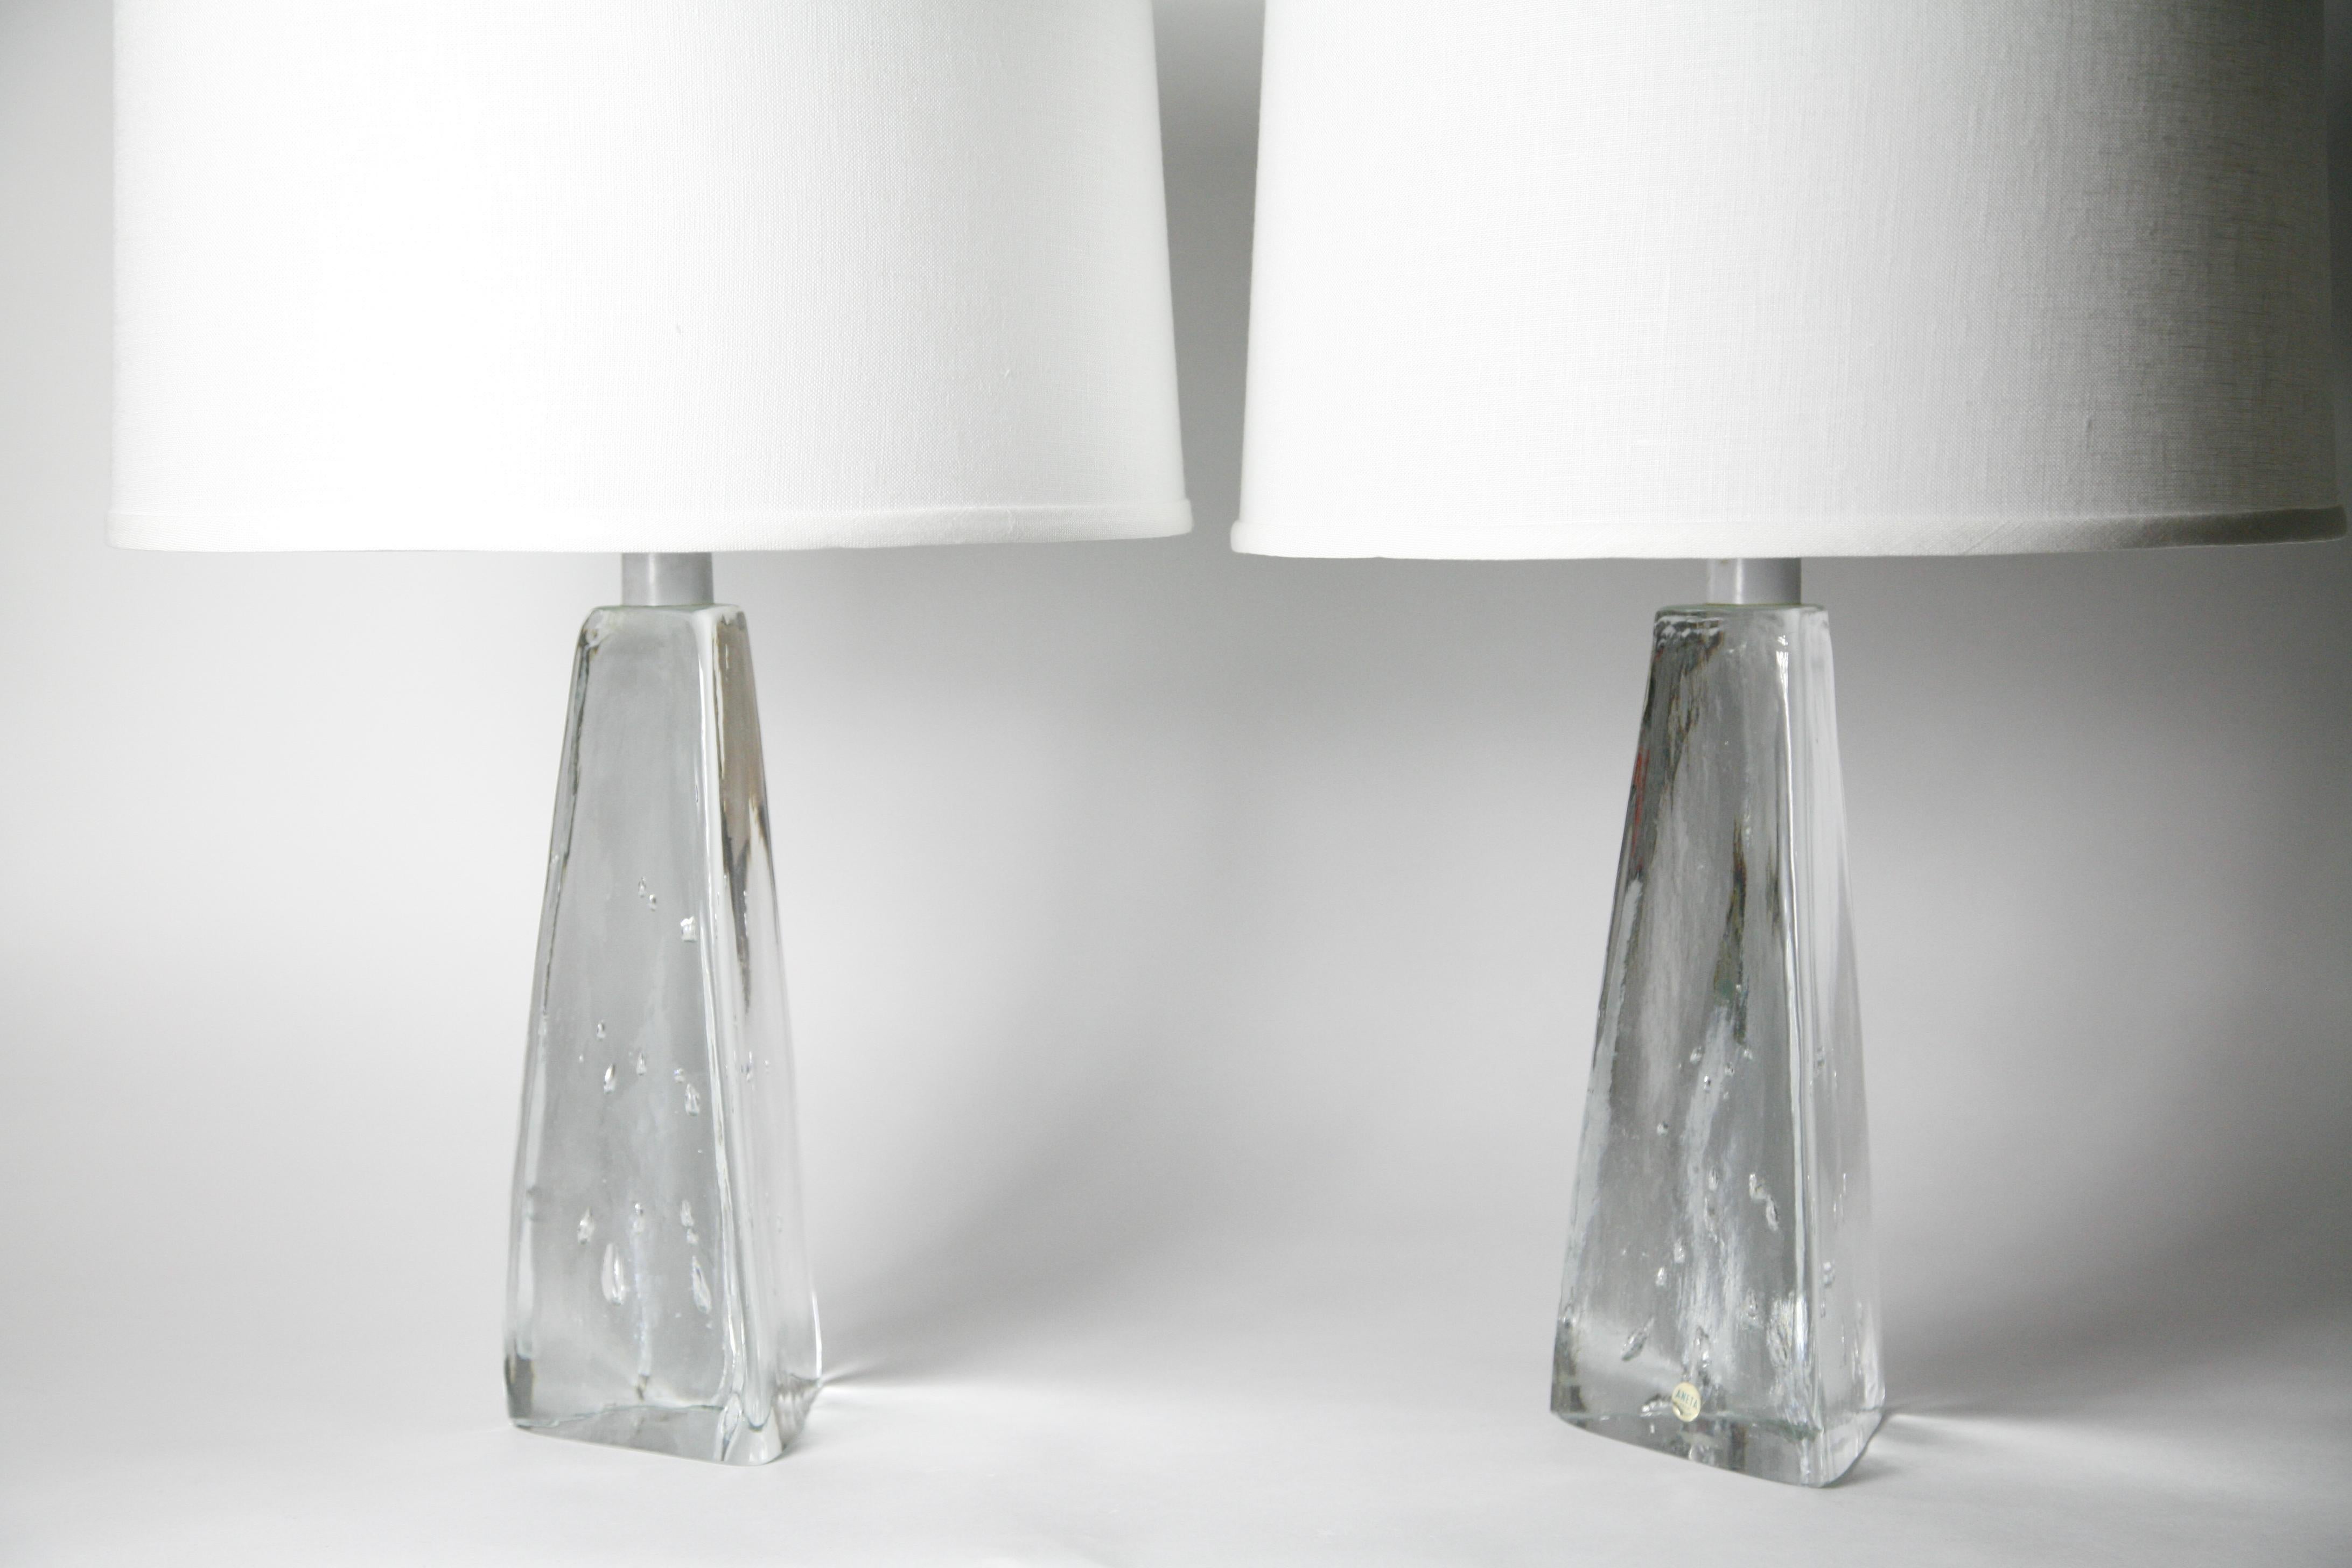 Pair of Triangular Solid Clear Aneta Lamps, Sweden, 1980 For Sale 2